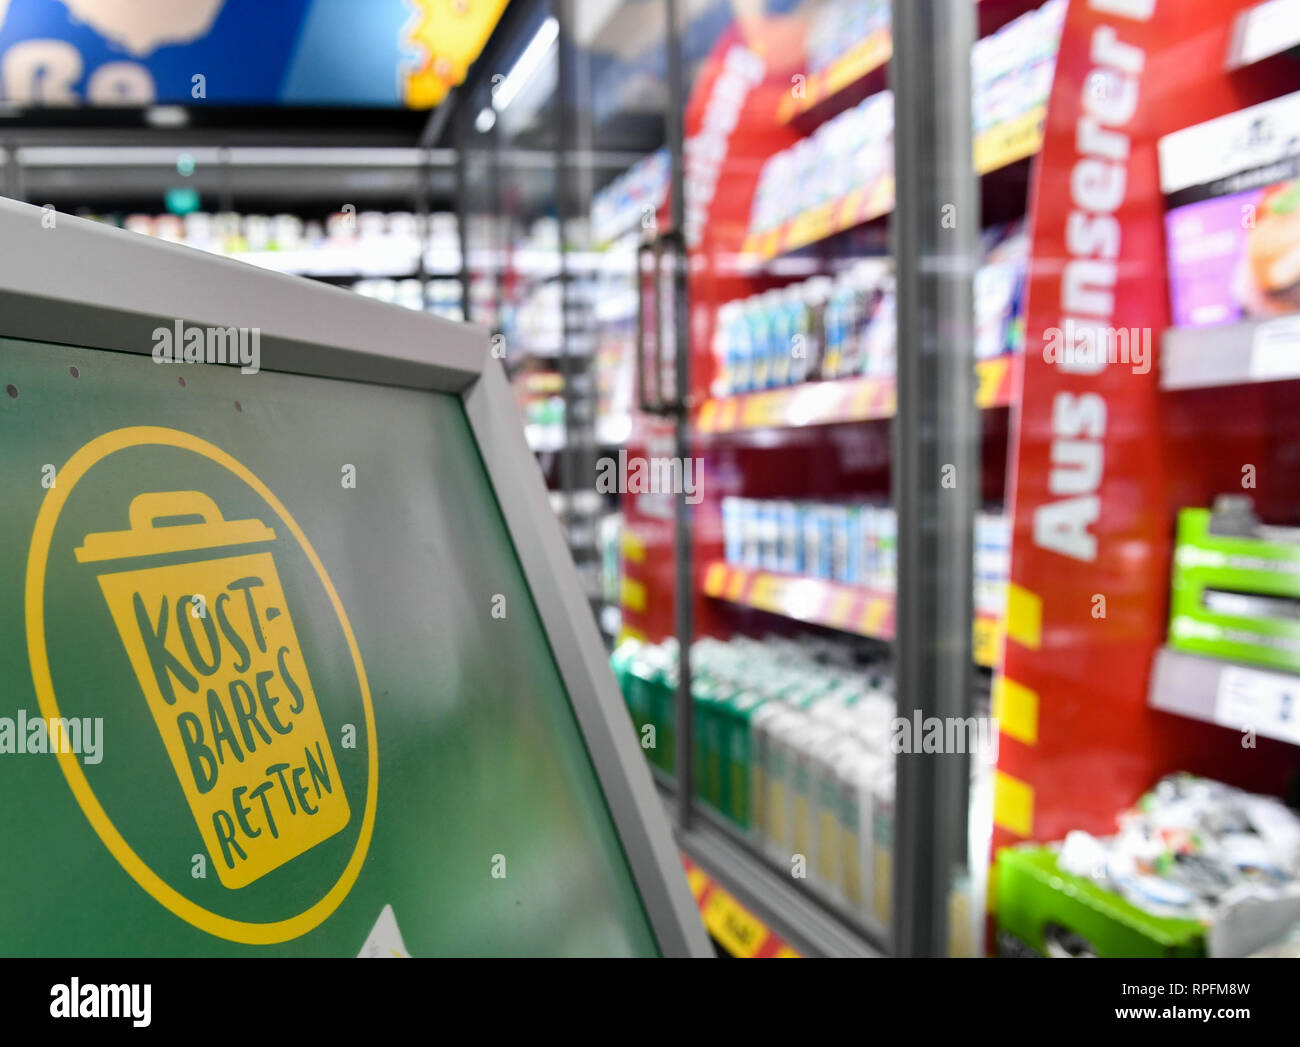 22 February 2019, Berlin: A display with the logo "Kostbares retten" stands  for the start of a Germany-wide campaign in the food discounter Penny in Boxhagener  Straße in Friedrichshain. The aim of